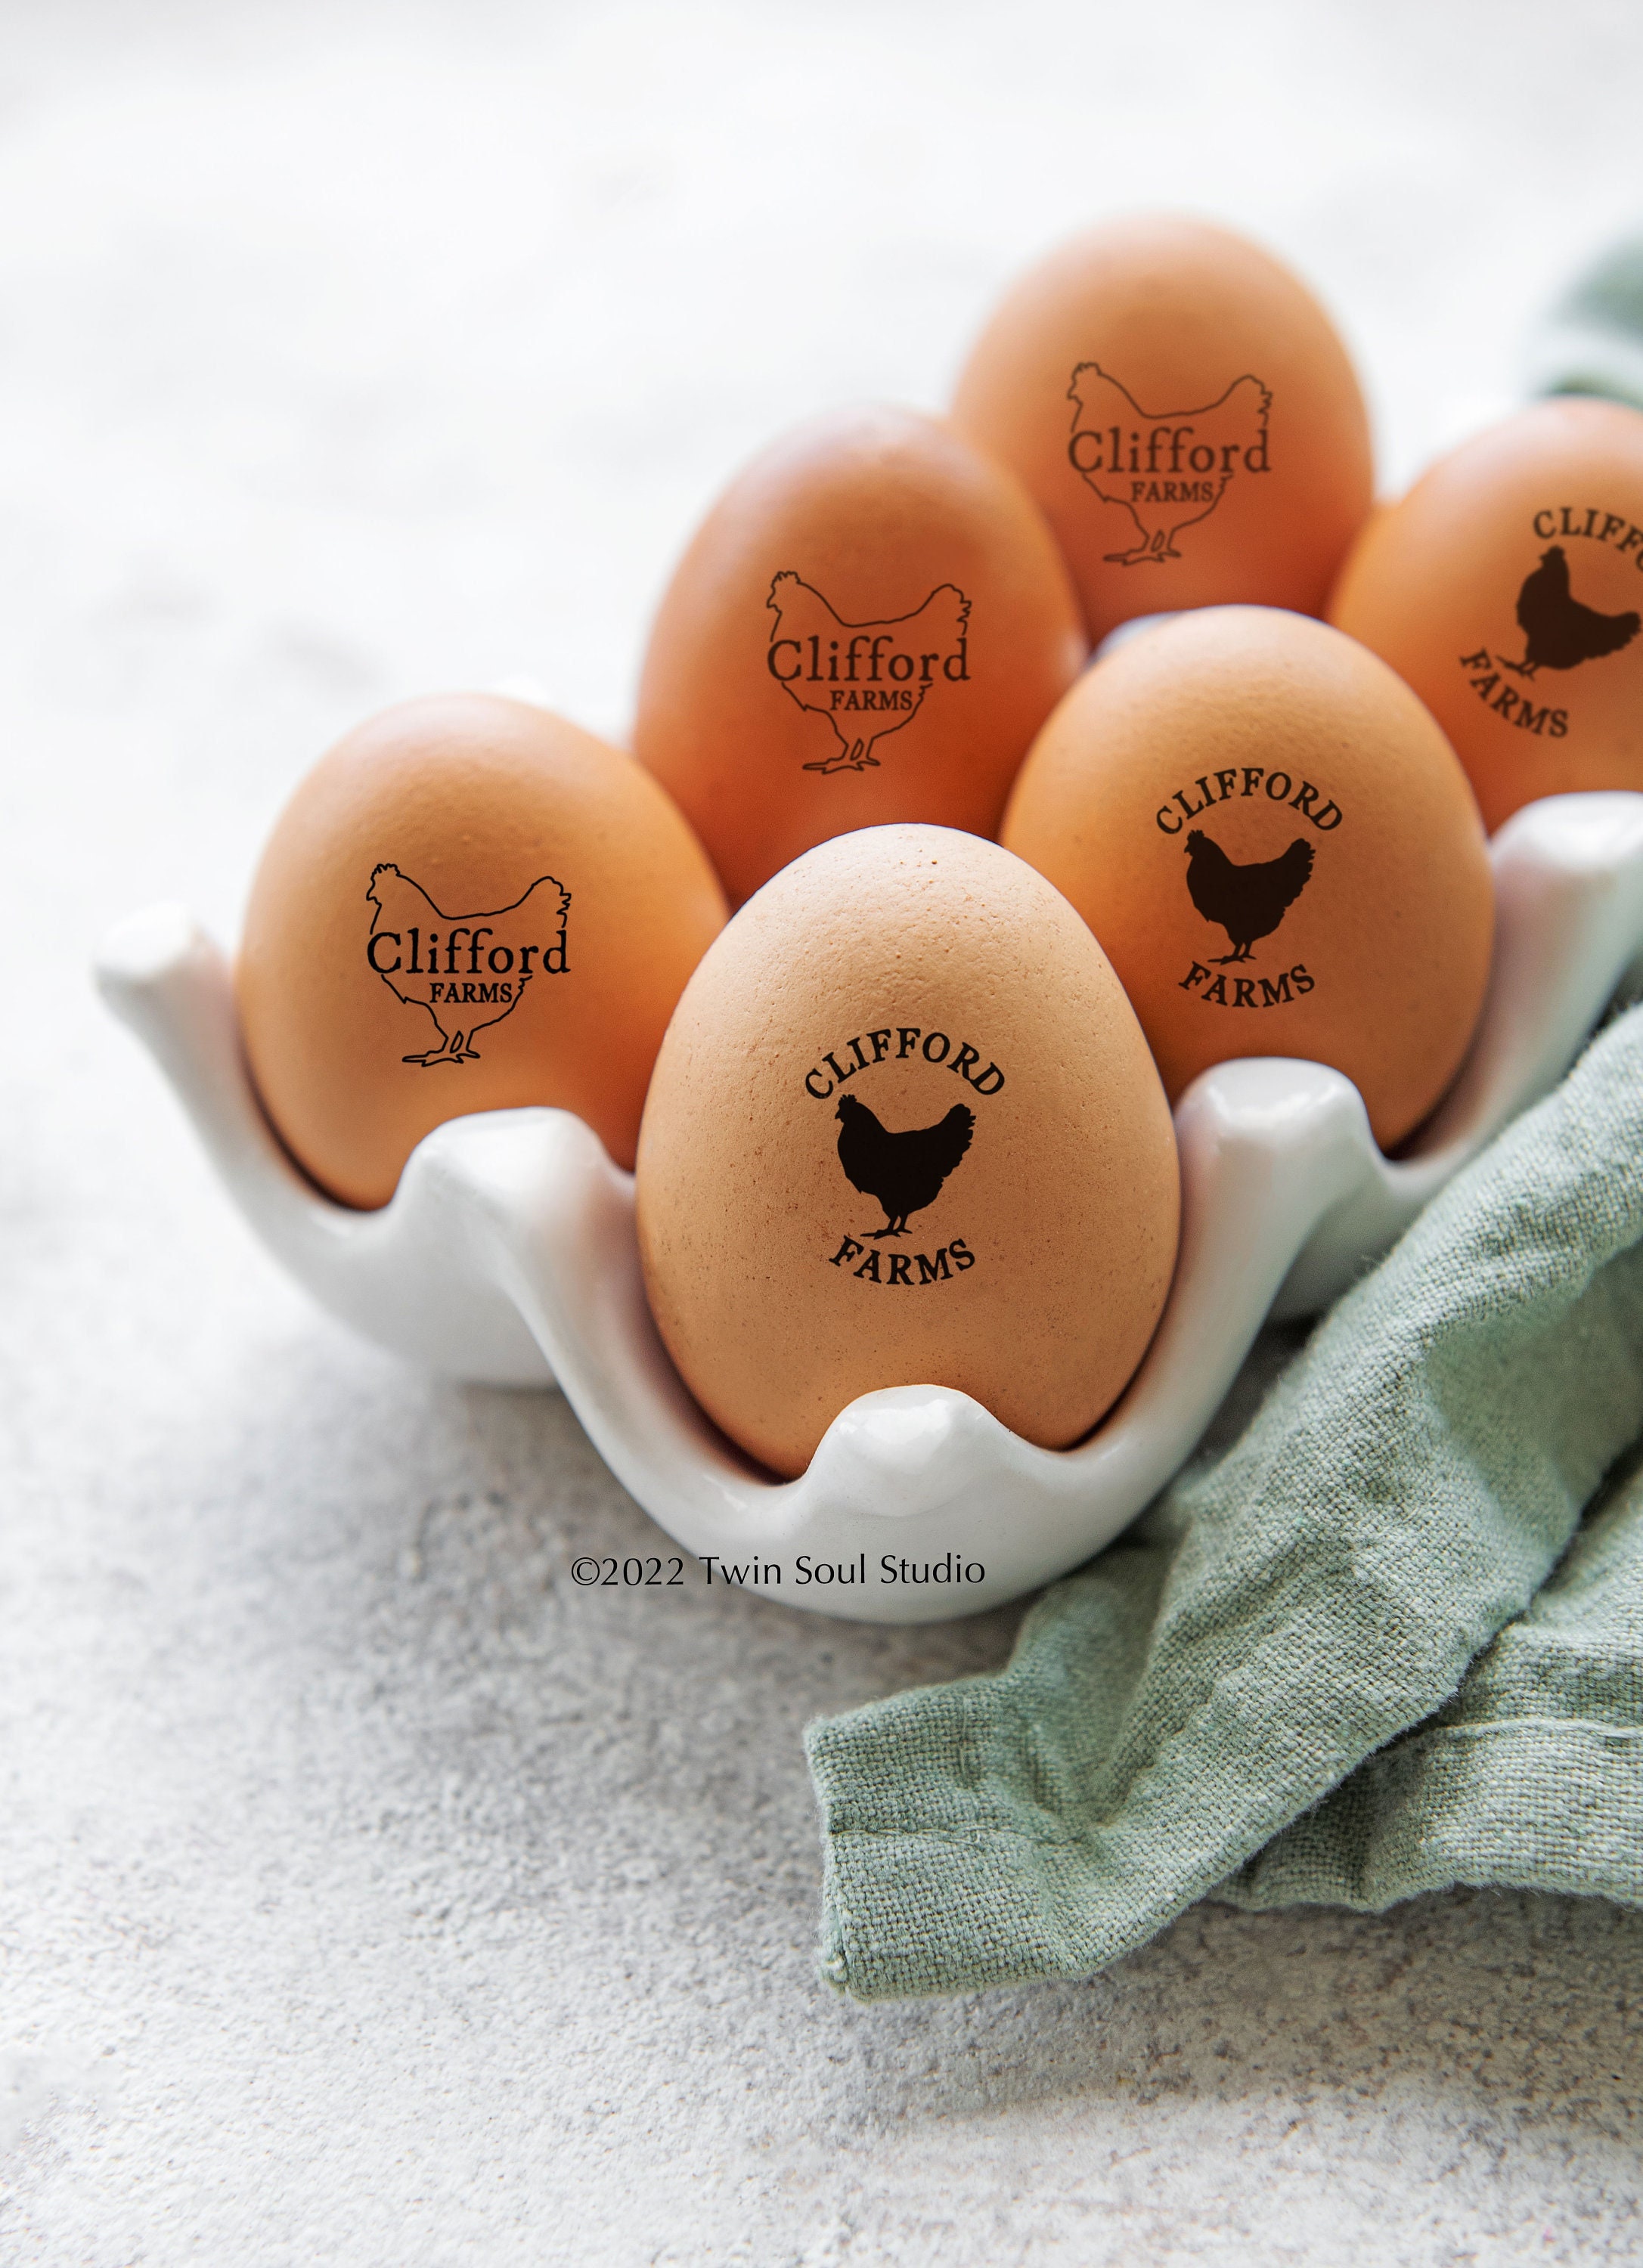  Egg Stamps, Cute Egg Stamps for Fresh Eggs with Stamp Pad  Personalized Egg Stamp for Farm Chicken Coop Farmhouse Supplies (Engraved  with Organic Eggs) : Office Products